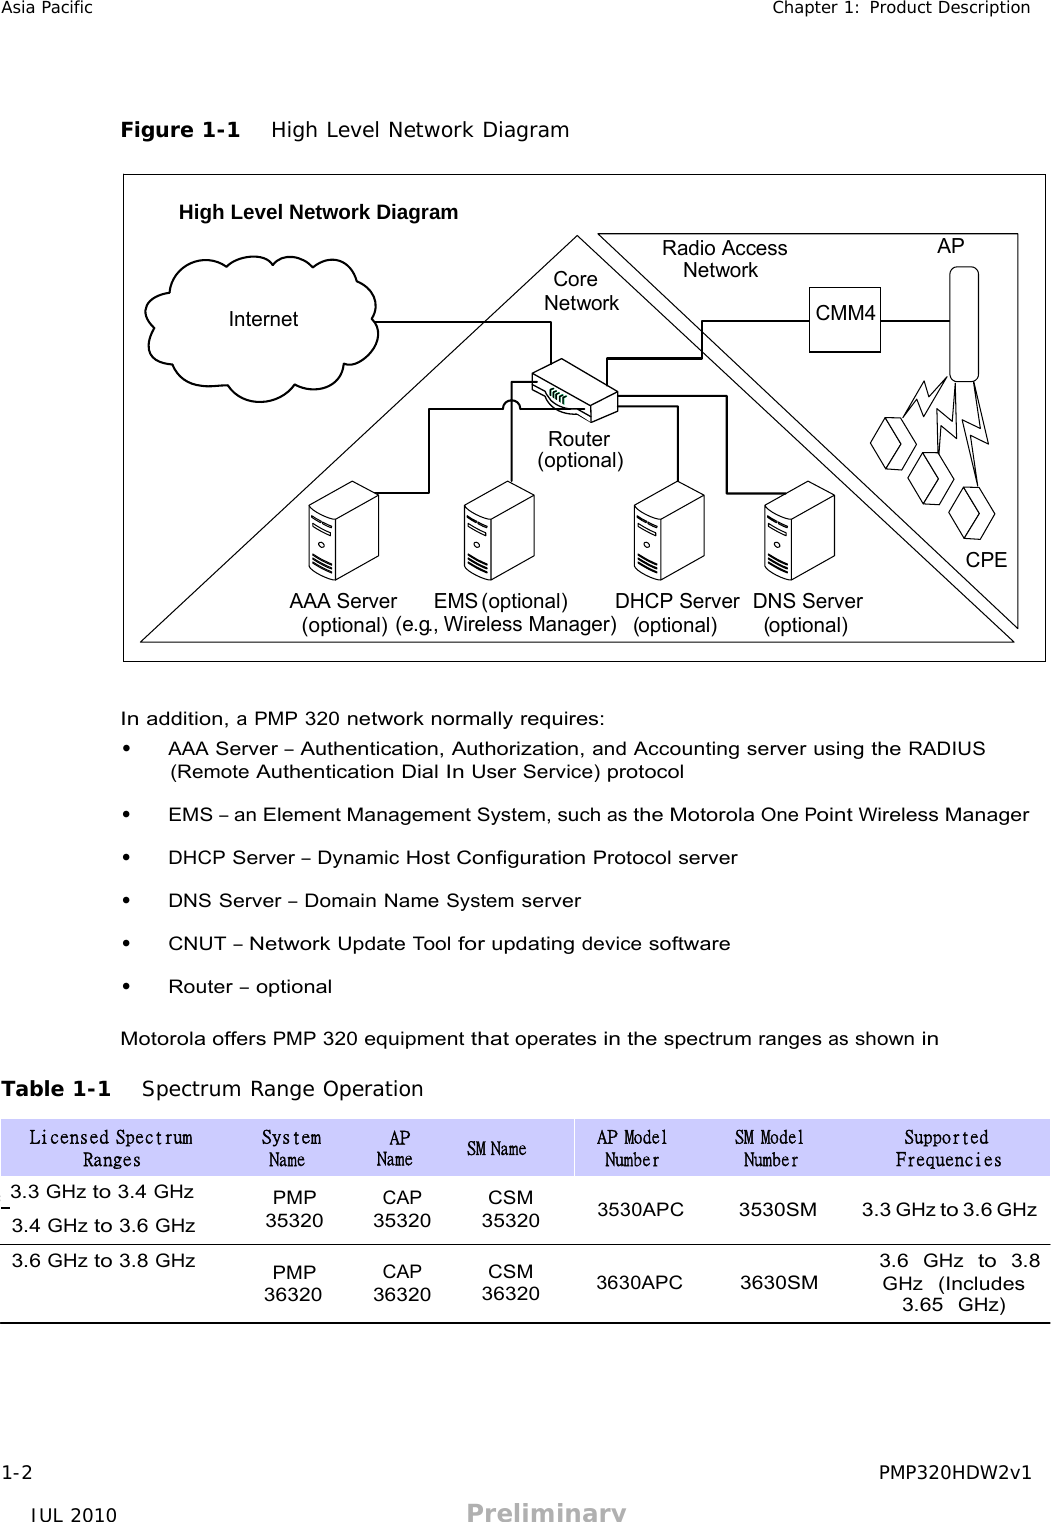 JUL 2010 Preliminary   Asia Pacific Chapter 1: Product Description      Figure 1-1   High Level Network Diagram    High Level Network Diagram     Internet    Core Network   Radio Access Network   AP   CMM4      Router (optional)     CPE  AAA Server EMS (optional) DHCP Server DNS Server (optional) (e.g., Wireless Manager) (optional) (optional)     In addition, a PMP 320 network normally requires: • AAA Server – Authentication, Authorization, and Accounting server using the RADIUS (Remote Authentication Dial In User Service) protocol  • EMS – an Element Management System, such as the Motorola One Point Wireless Manager  • DHCP Server – Dynamic Host Configuration Protocol server  • DNS Server – Domain Name System server  • CNUT – Network Update Tool for updating device software  • Router – optional  Motorola offers PMP 320 equipment that operates in the spectrum ranges as shown in  Table 1-1   Spectrum Range Operation  Licensed Spectrum Ranges System Name AP Name SM Name AP Model Number SM Model Number Supported Frequencies  = 3.3 GHz to 3.4 GHz 3.4 GHz to 3.6 GHz  PMP 35320  CAP 35320  CSM 35320  3530APC 3530SM 3.3 GHz to 3.6 GHz  3.6 GHz to 3.8 GHz PMP 36320  CAP 36320  CSM 36320 3630APC 3630SM  3.6  GHz  to  3.8 GHz  (Includes 3.65  GHz)        1-2 PMP320HDW2v1 